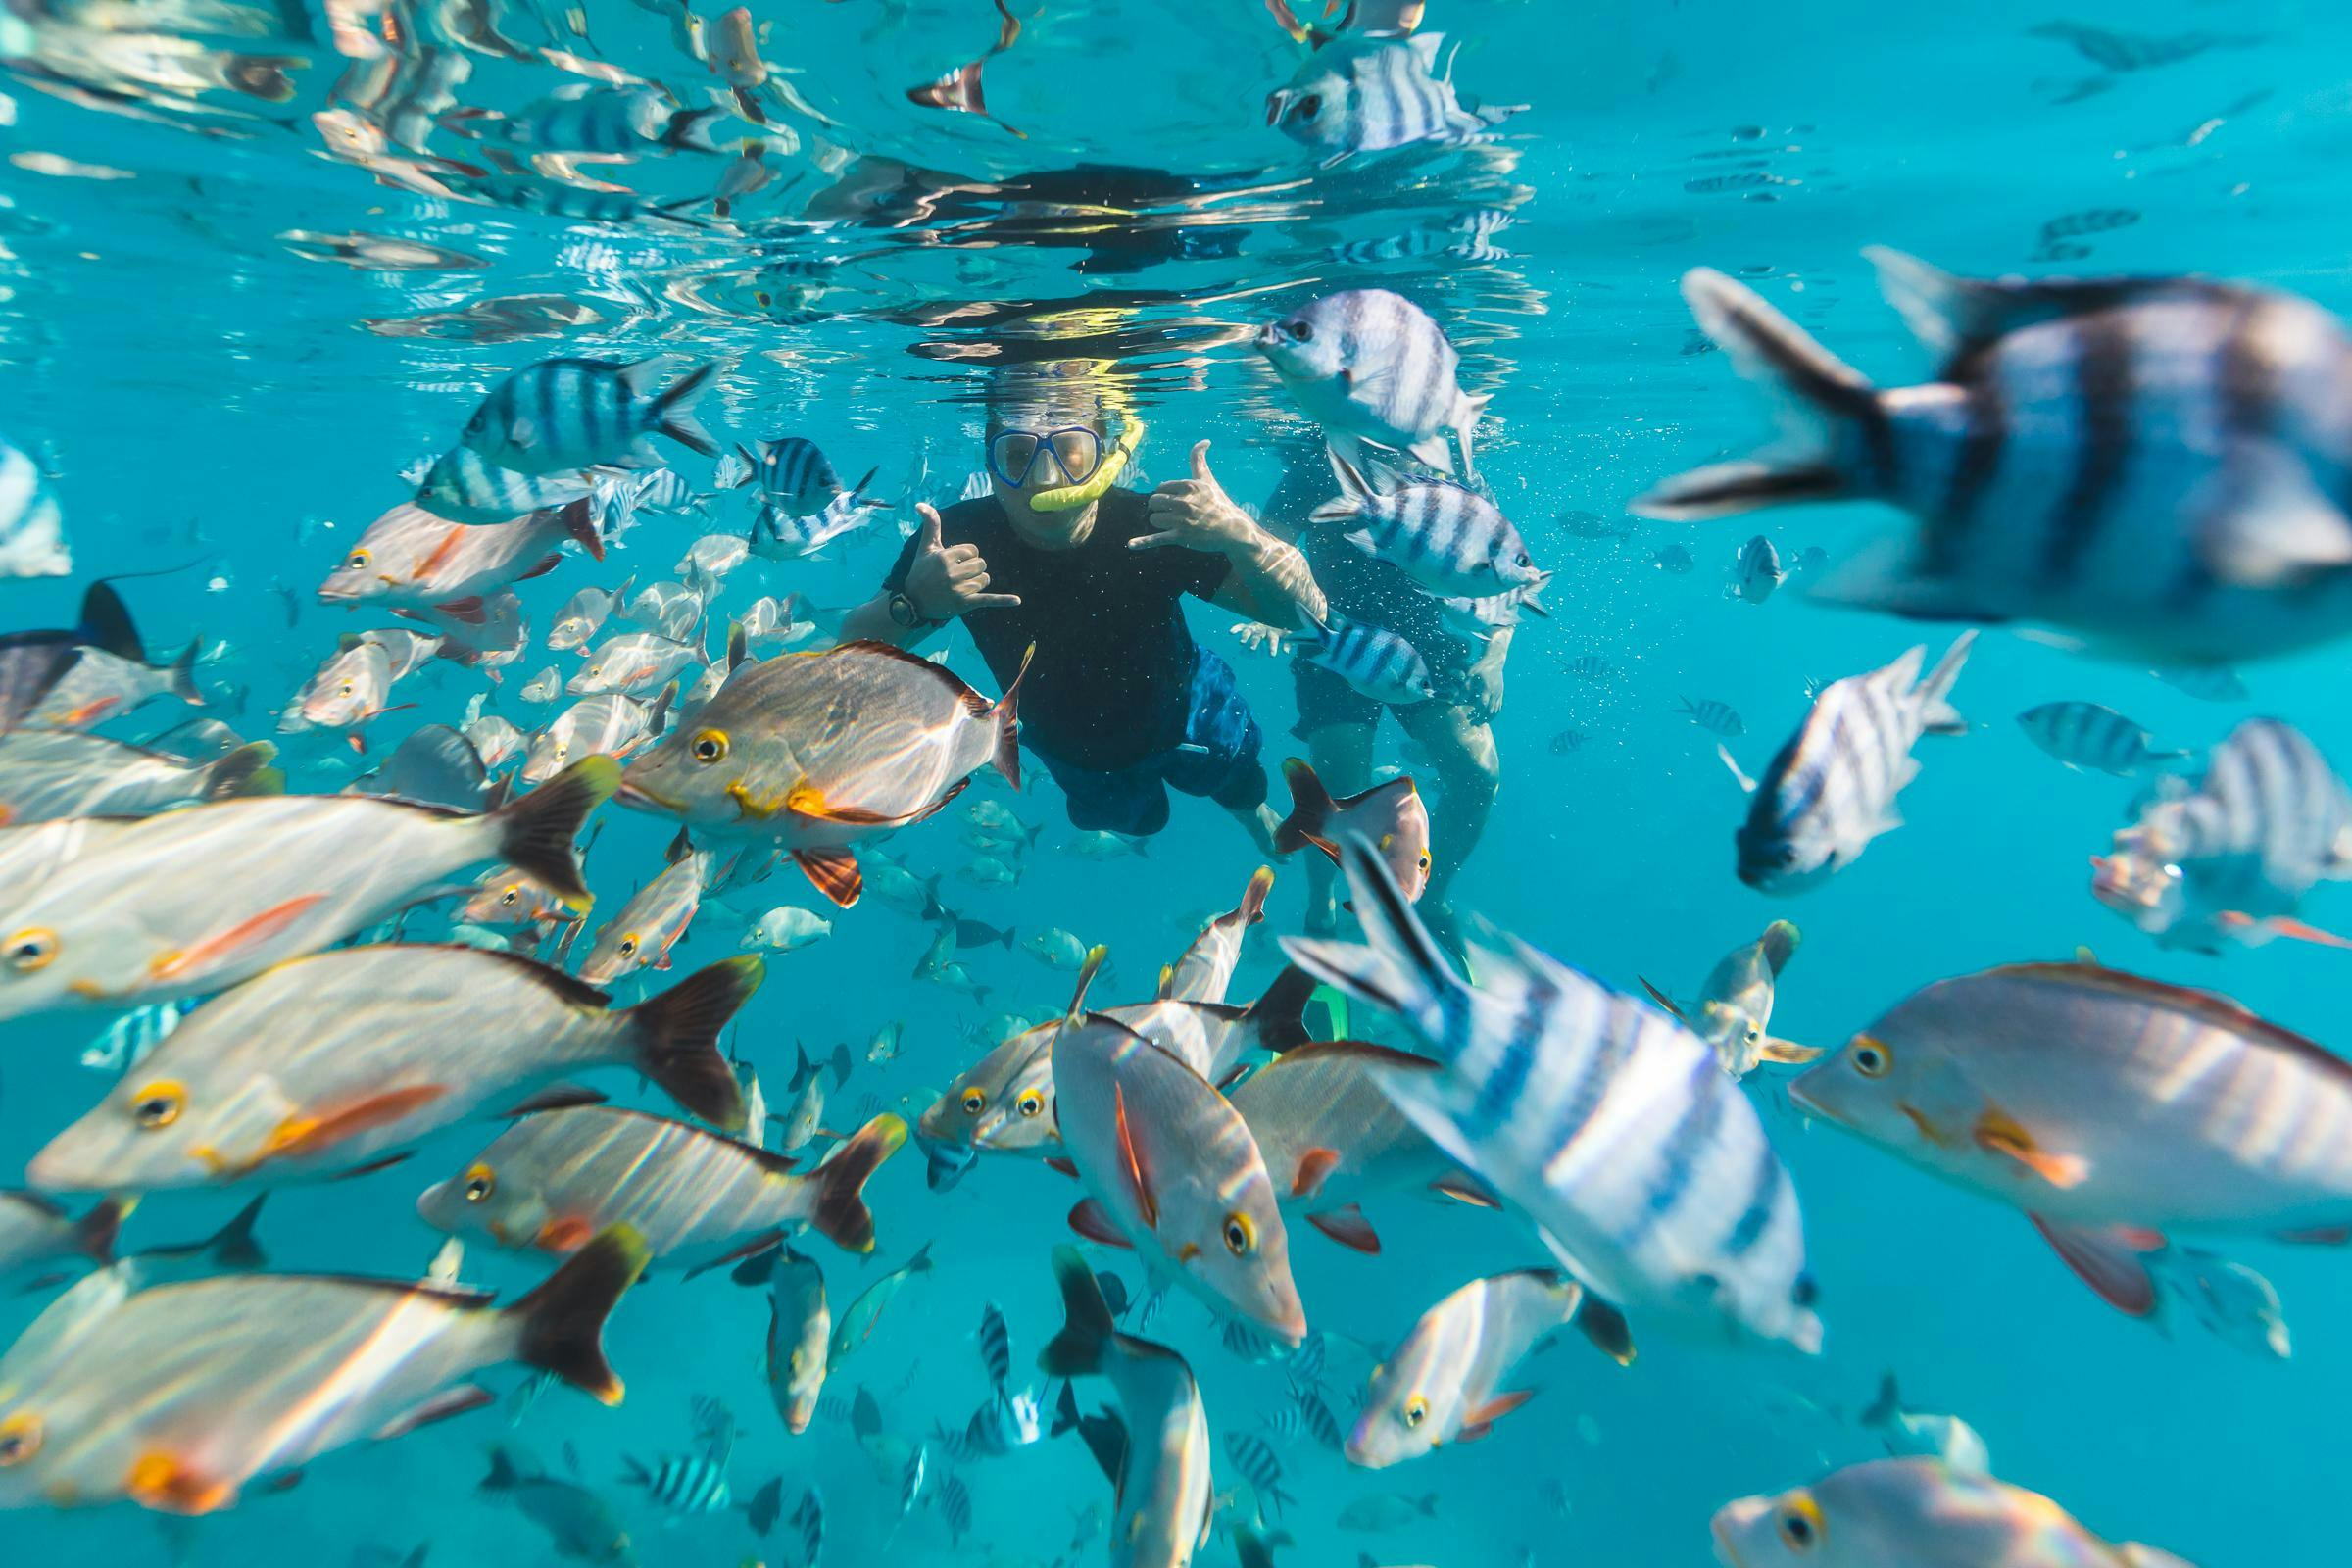 A Lindblad staff member snorkeling among a schools of fish at the Aquarium site in Rangiroa atoll in French Polynesia